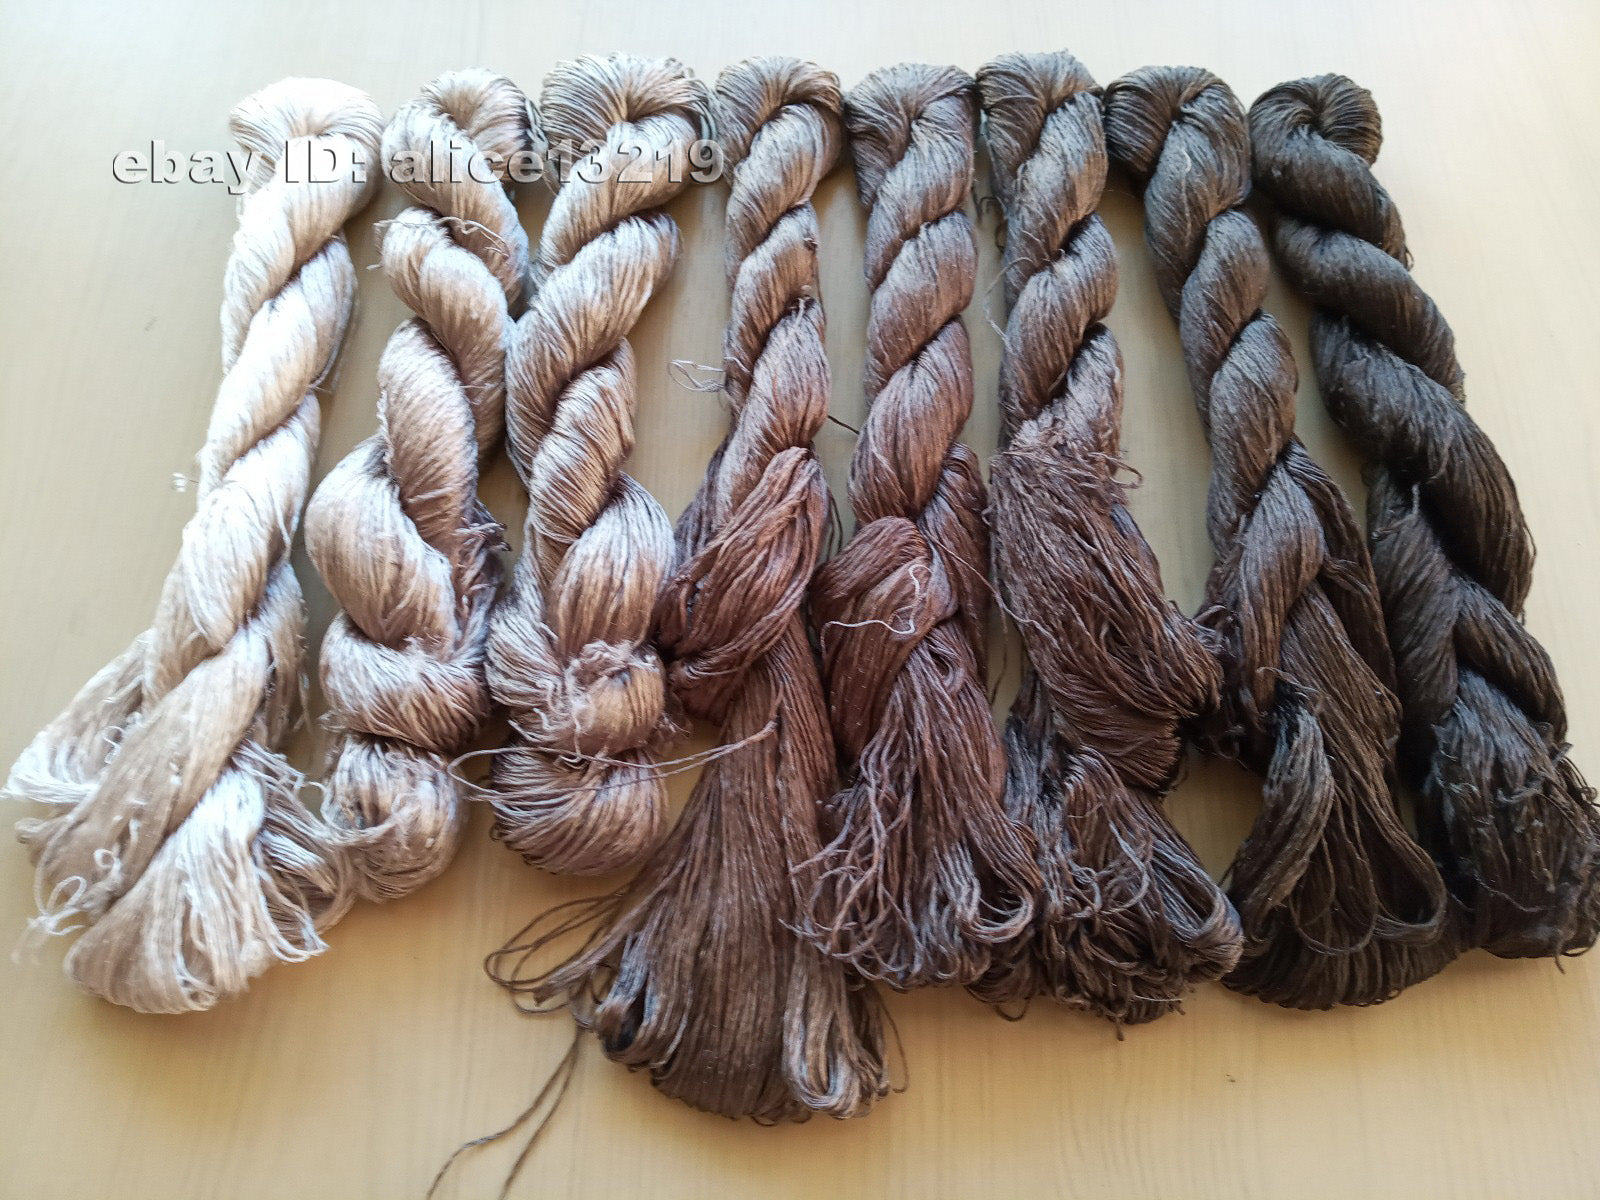 8bundles 100%real mulberry silk,hand-dyed embroidery silk floss